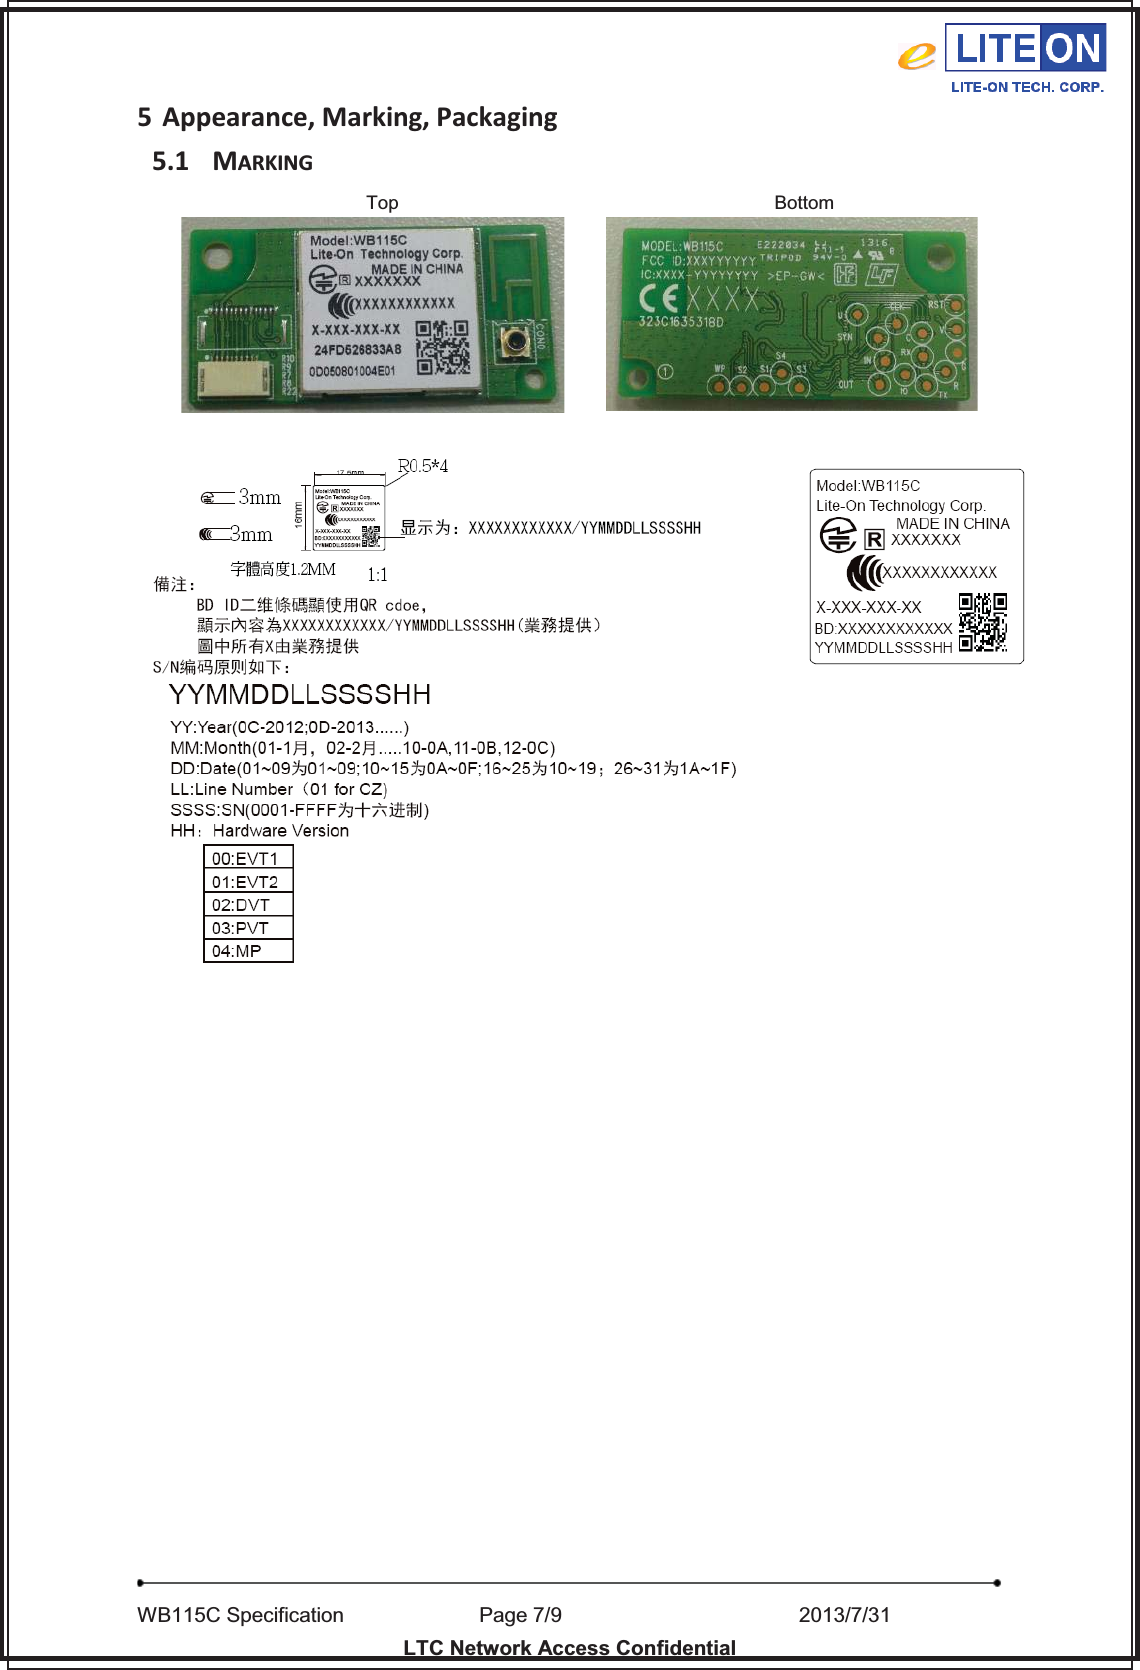   WB115C Specification        Page 7/9                    2013/7/31  LTC Network Access Confidential 5 Appearance, Marking, Packaging 5.1 MARKING 7RS%RWWRP